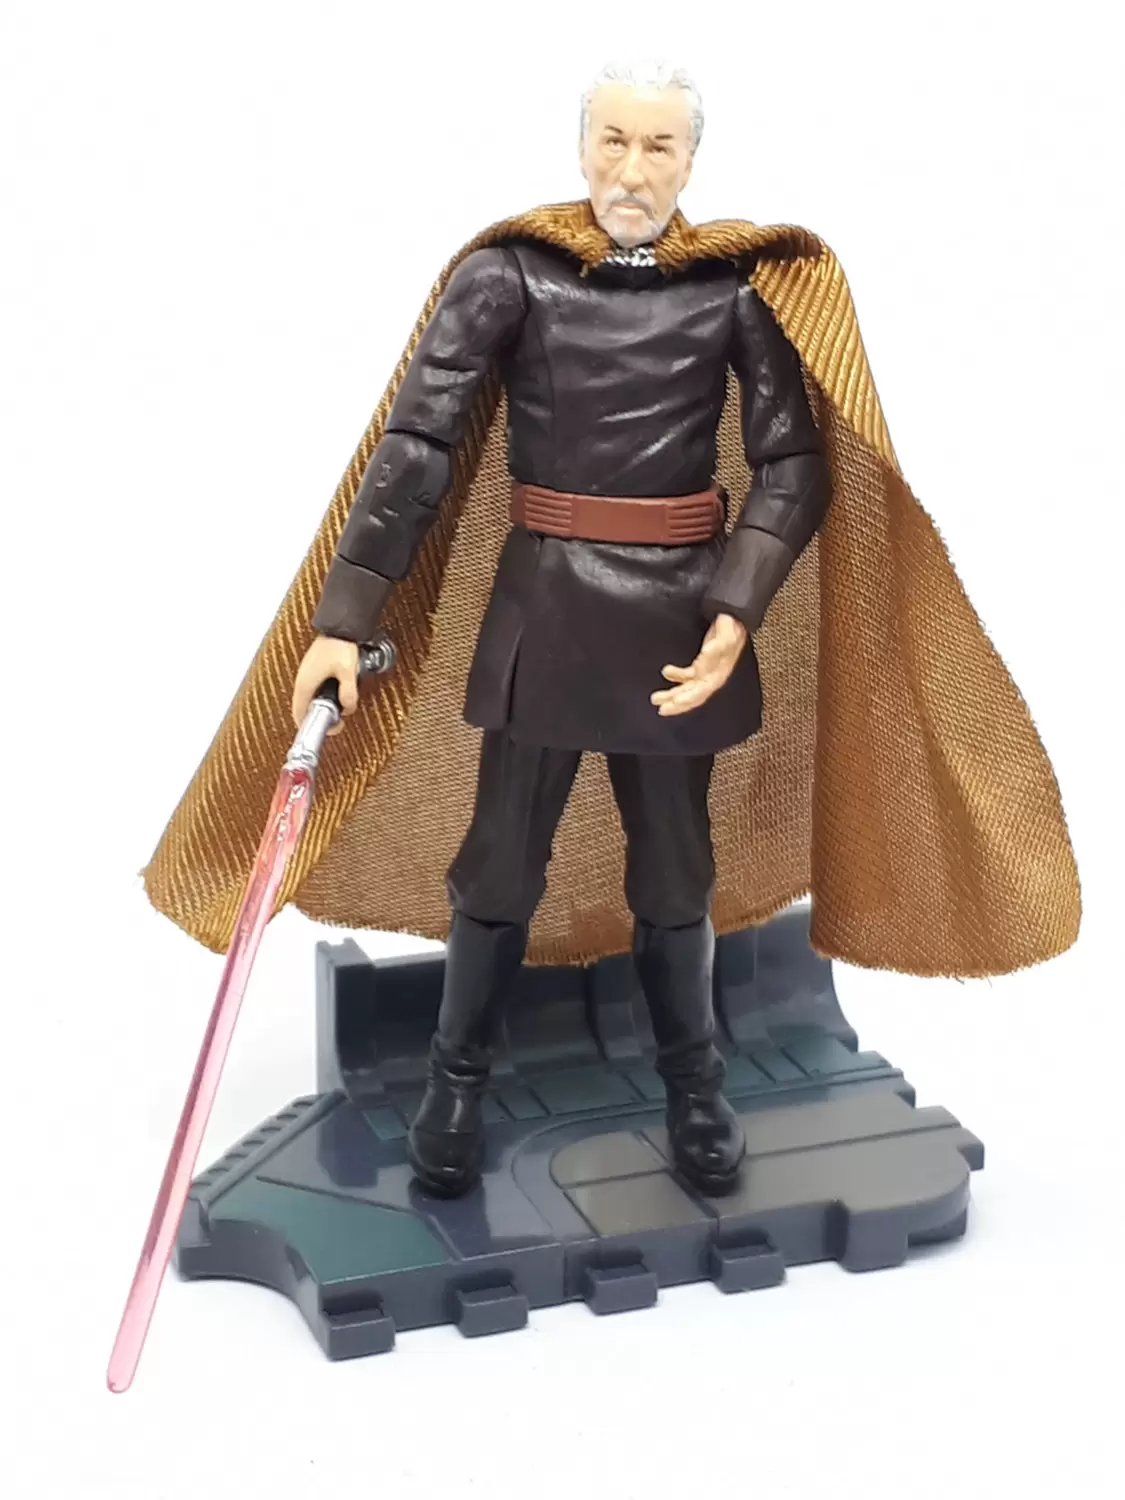 Revenge of the Sith - Count Dooku (Sith Lord)